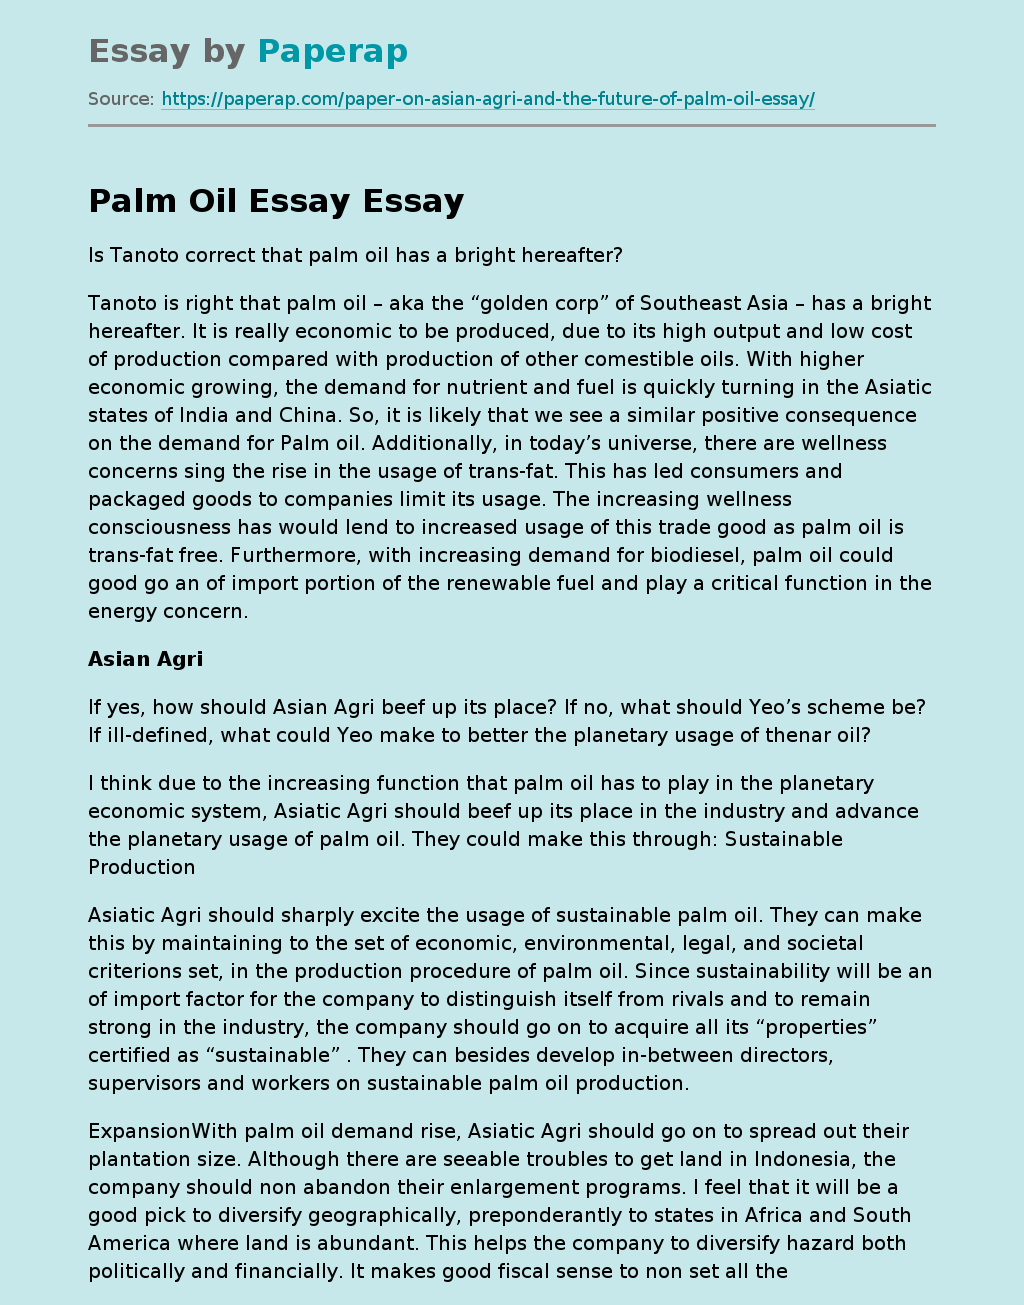 Palm Oil - Vegetable Oil From the Oil Palm